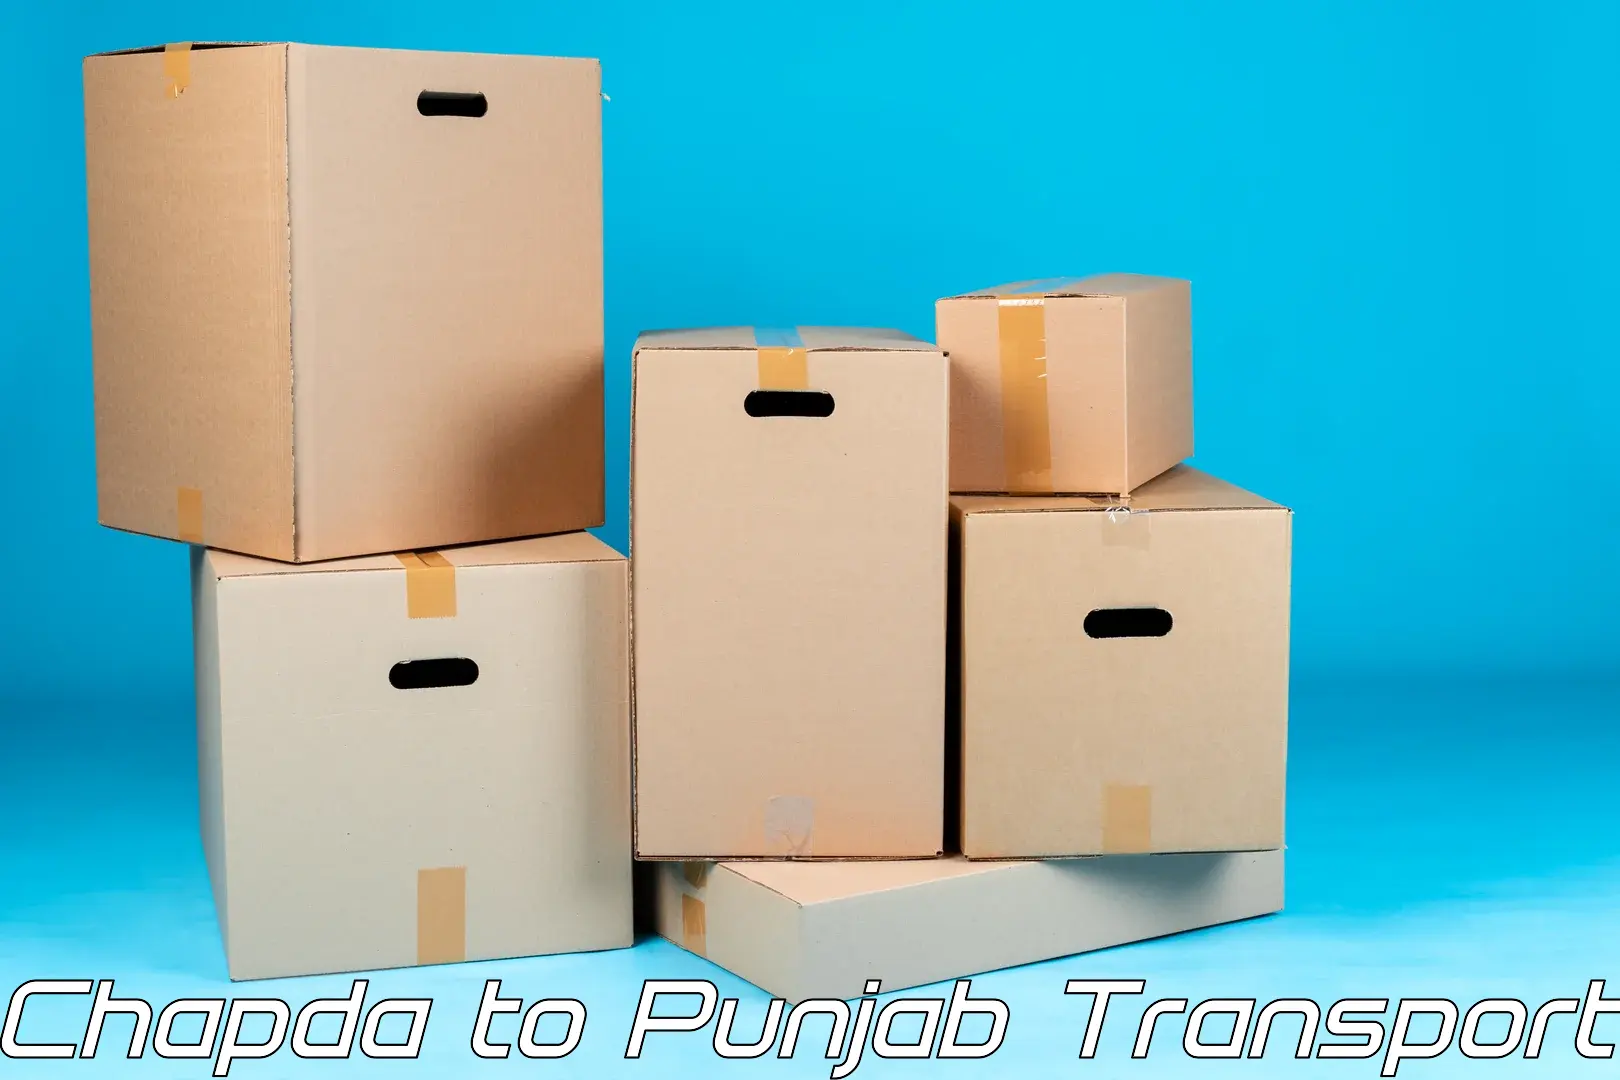 Commercial transport service Chapda to Ludhiana